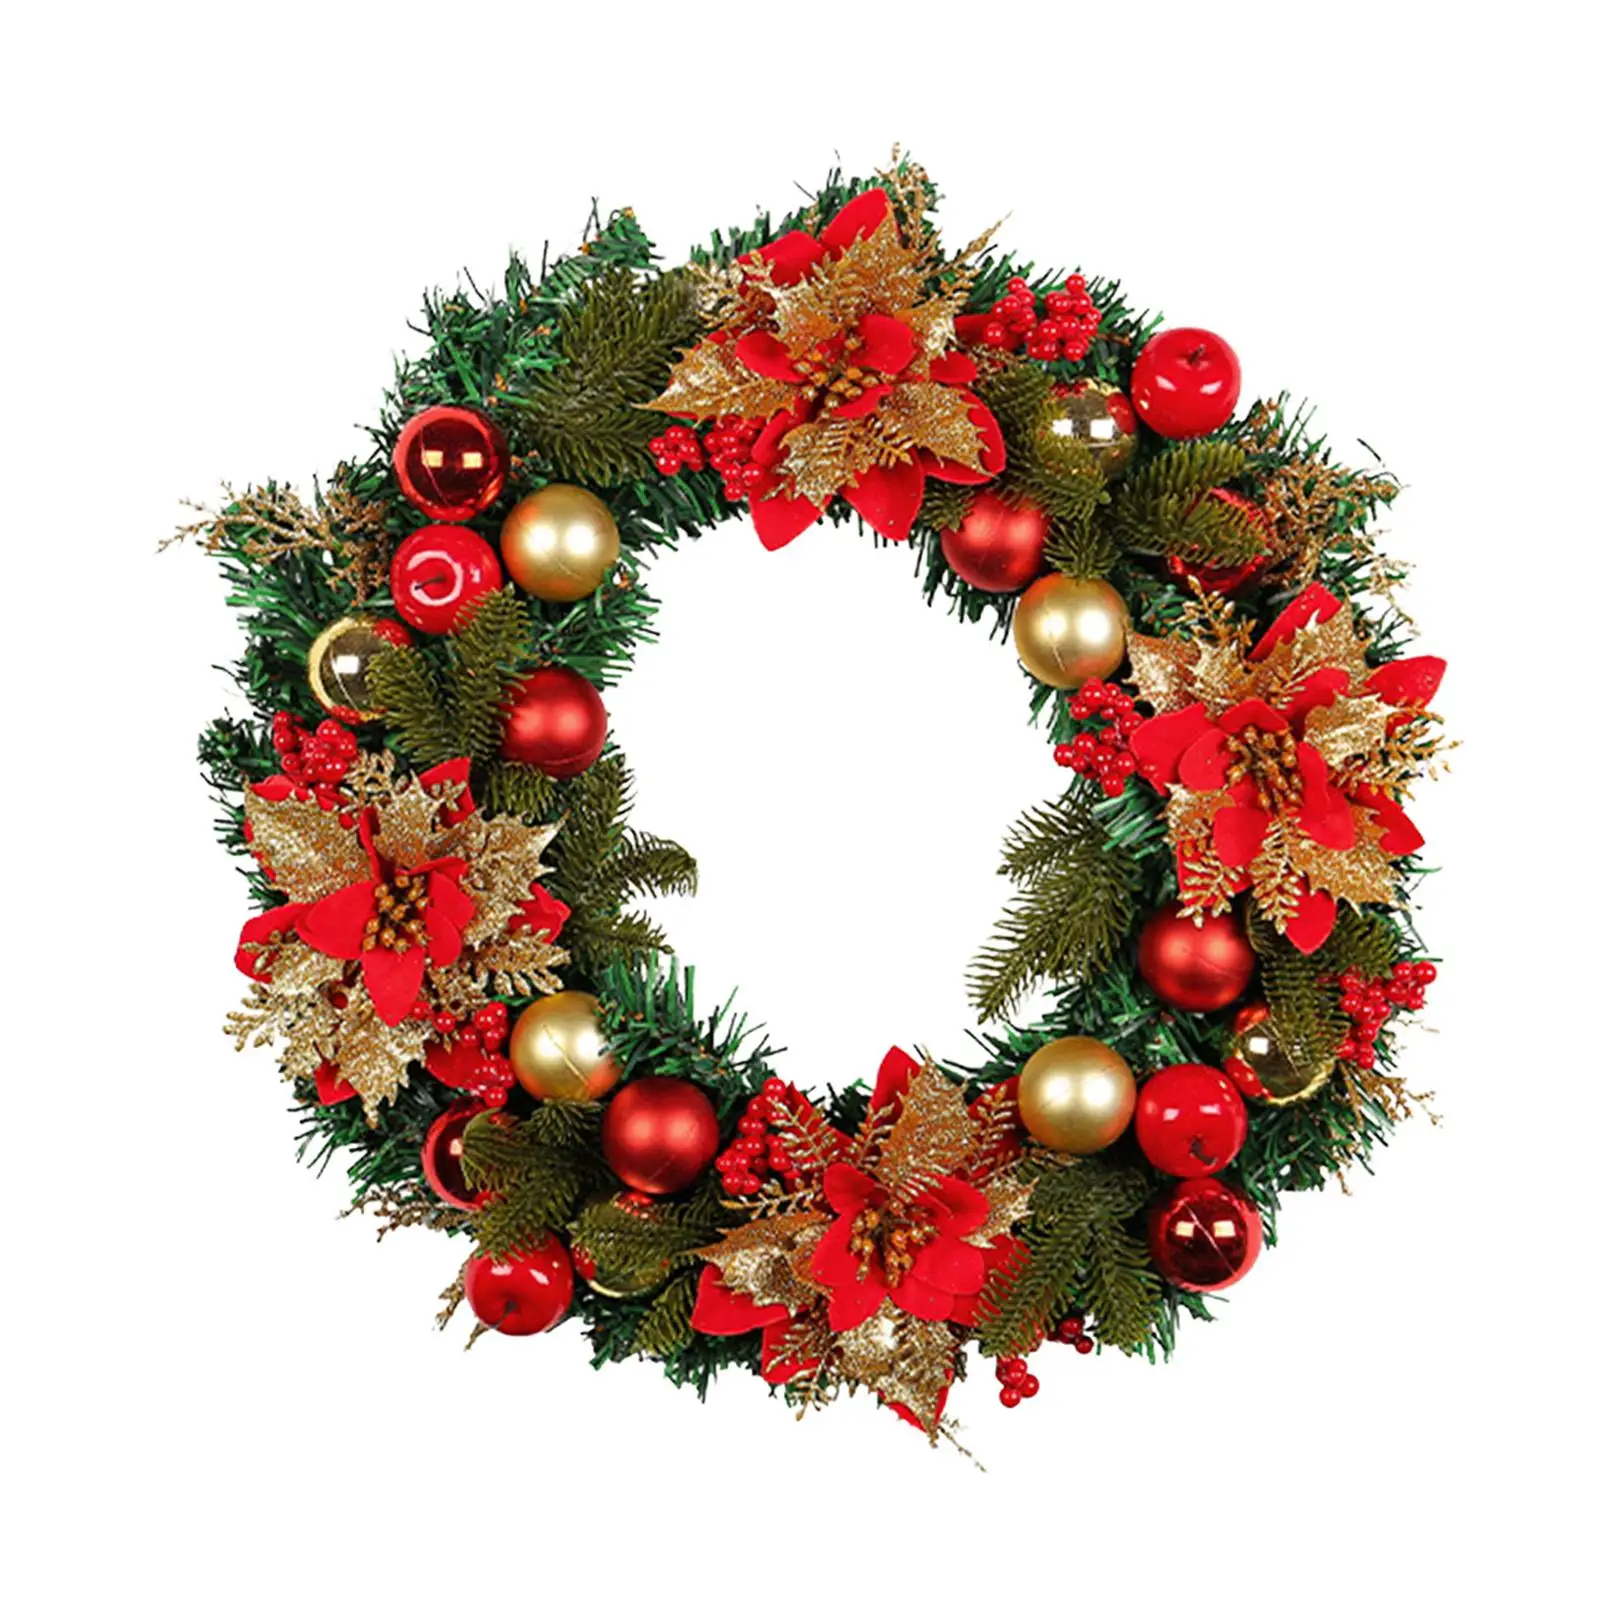 Christmas Wreath Decor Red Berries Wall Hanging Greenery Decorative Artificial for Office Party Indoor Outdoor Window New Year